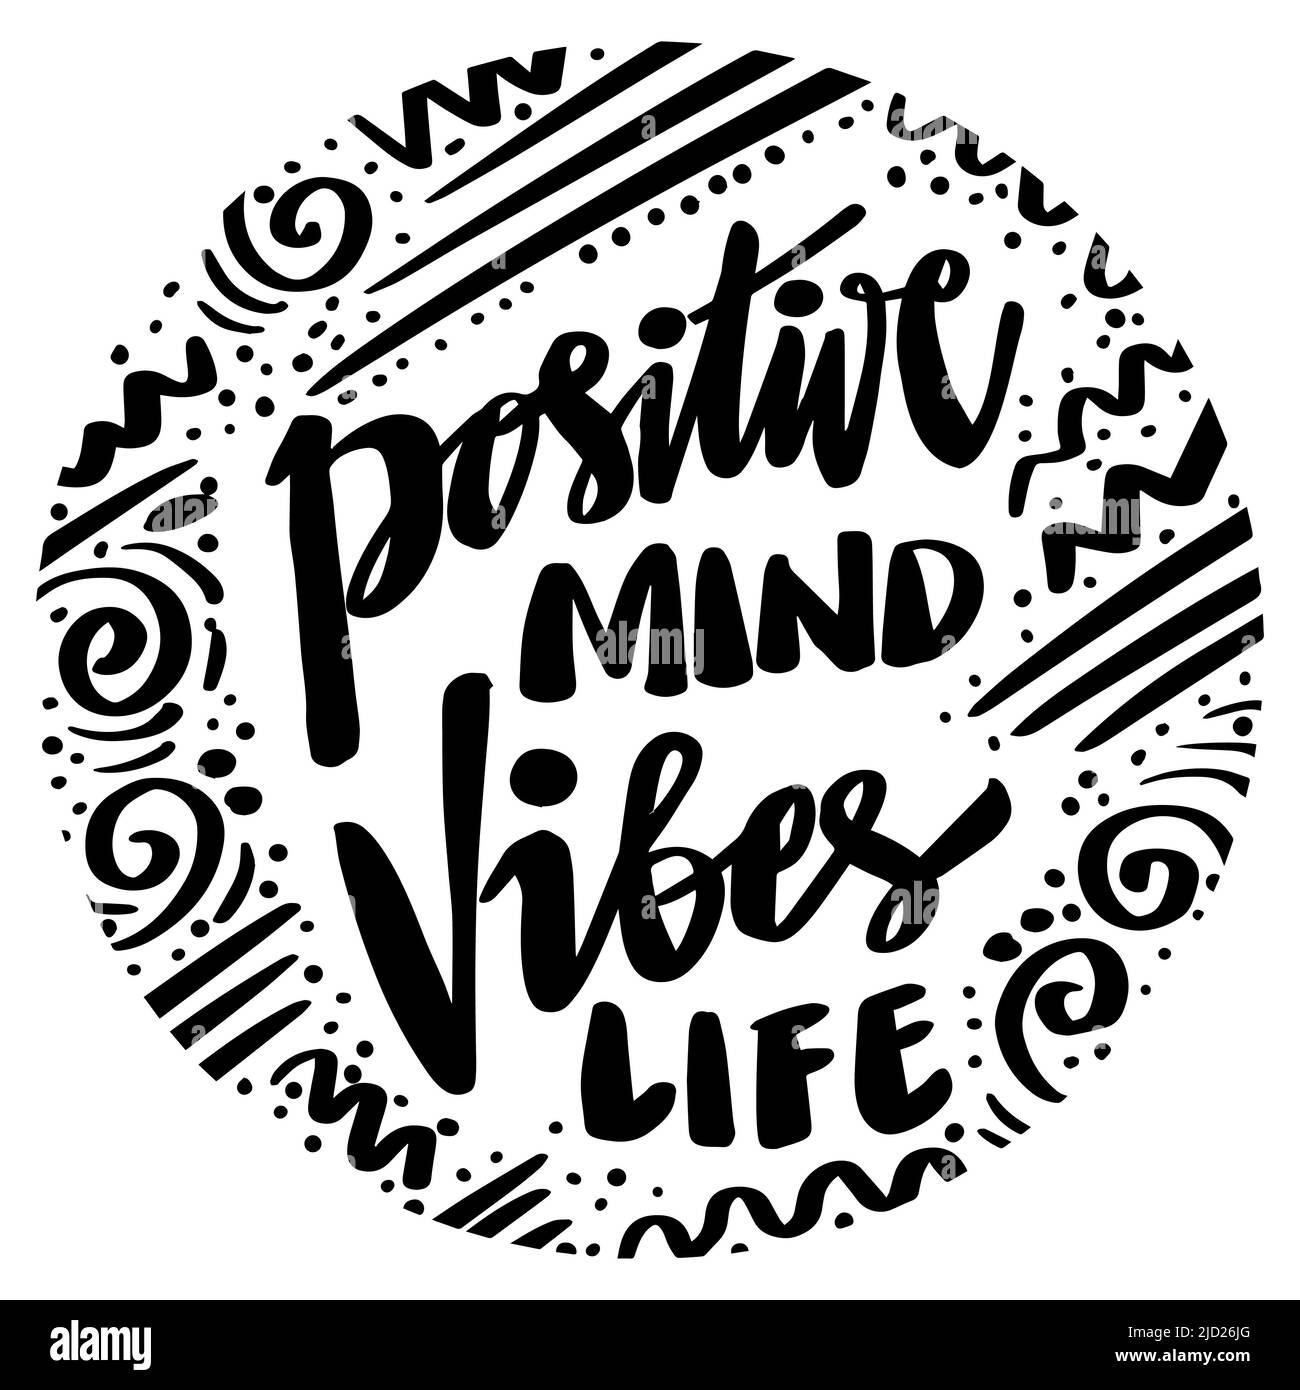 Positive mind vibes life on round background. Poster quotes Stock Photo -  Alamy